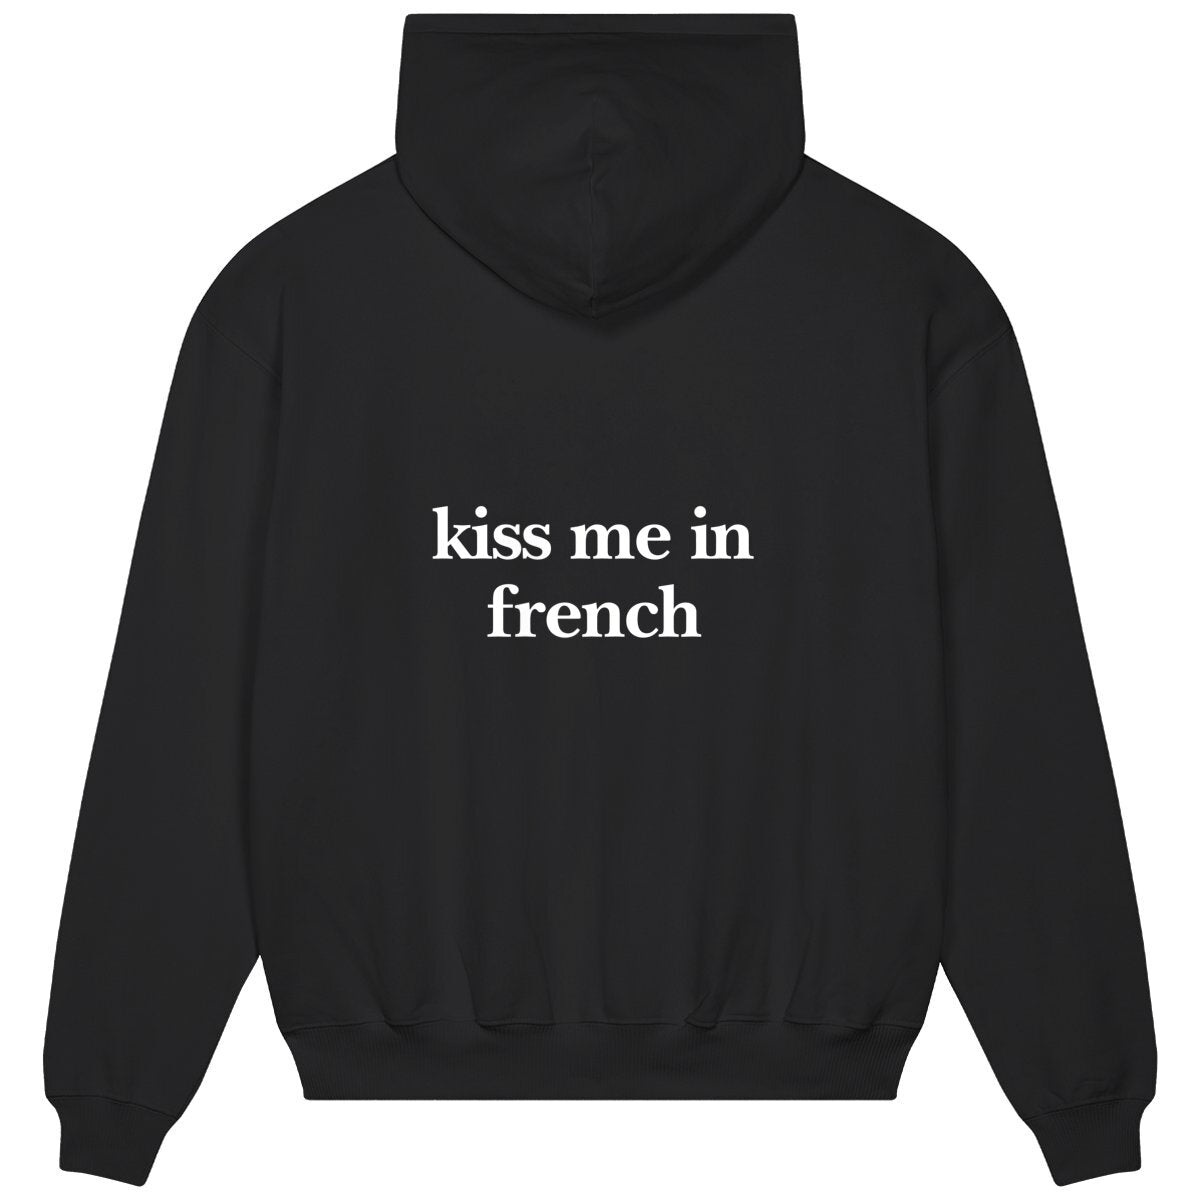 kiss me in french hoodie oversized. garçon garçon essentiel oversized hoodie. Sleek in black and whispering Parisian chic, this hoodie is the sartorial whisper of 'garçon garçon' — a statement of understated elegance. Perfect for those who carry a piece of Paris in their hearts and a touch of audacity on their sleeves.